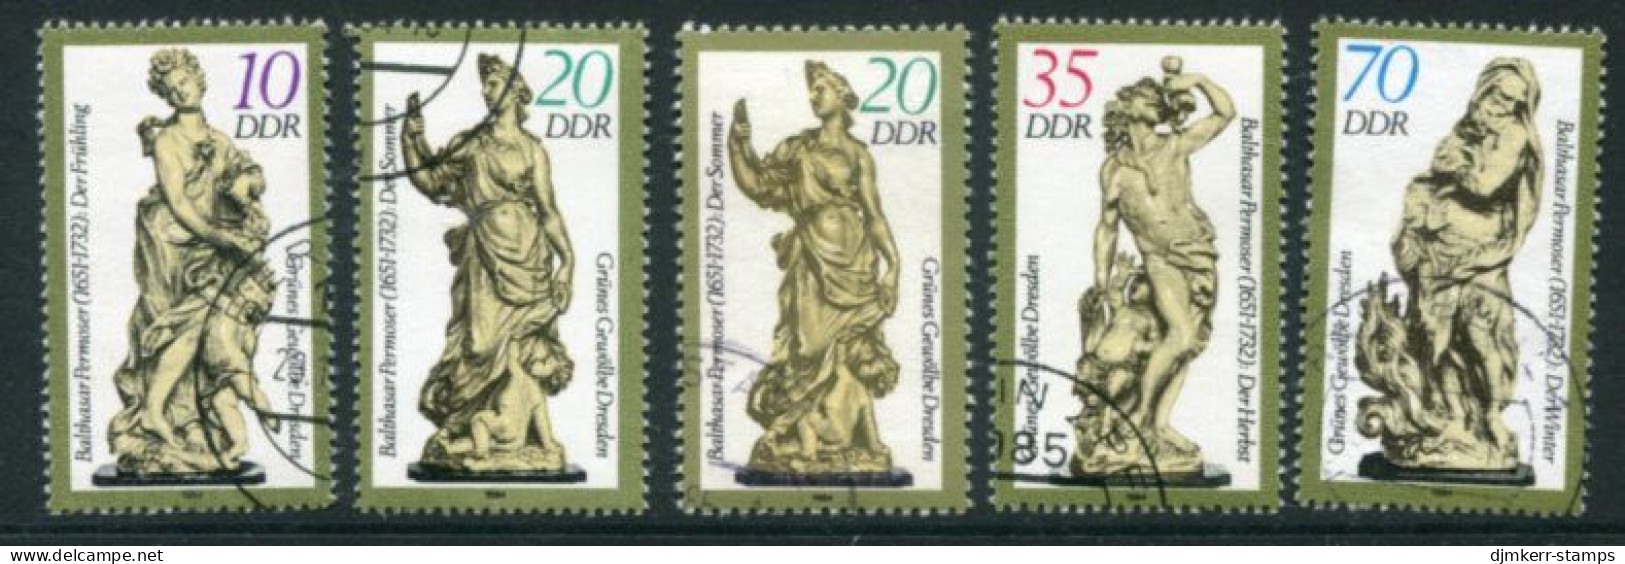 DDR 1984 Statues From The Green Vault With Both 20 Pf. Used.  Michel 2905-08 - Gebraucht